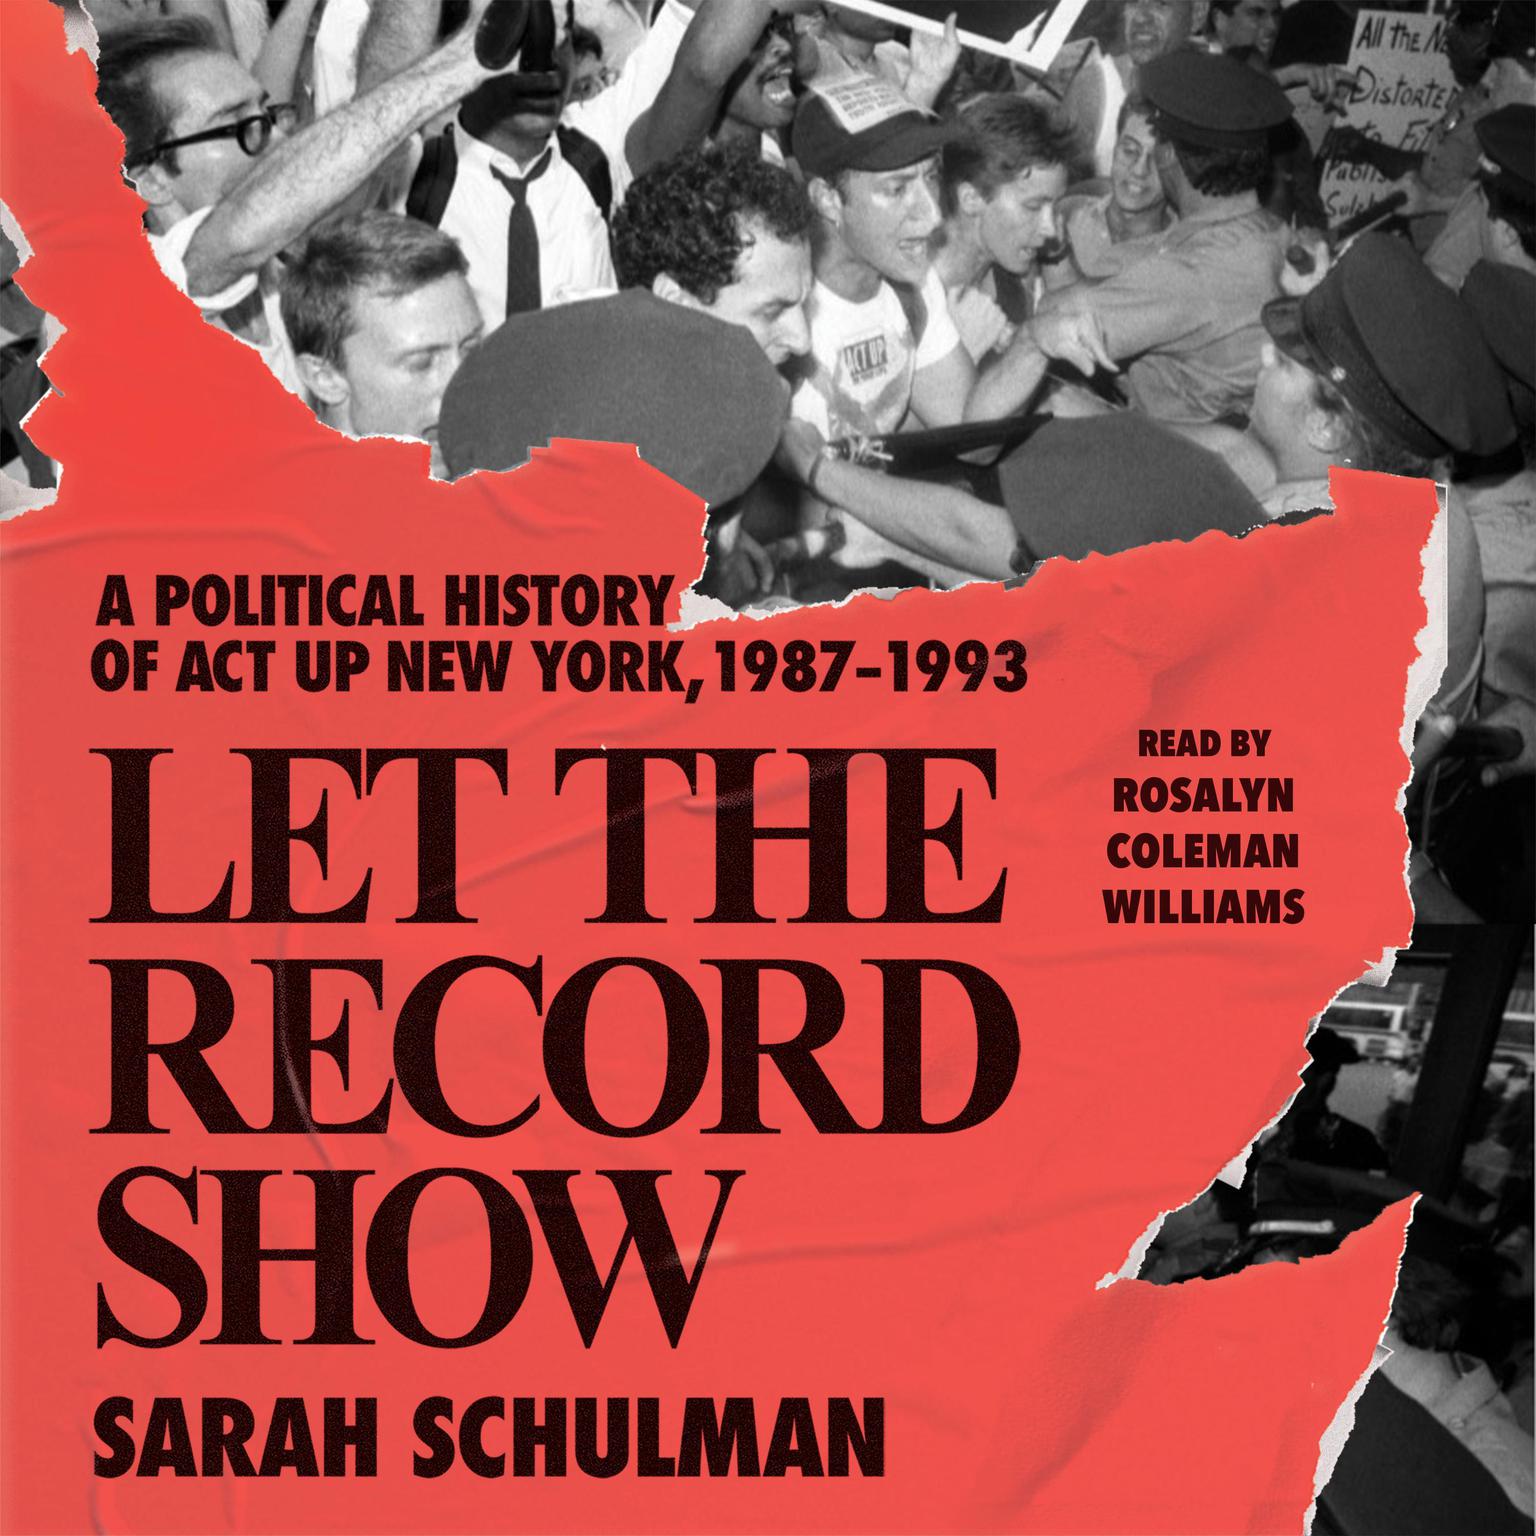 Let the Record Show: A Political History of ACT UP New York, 1987-1993 Audiobook, by Sarah Schulman